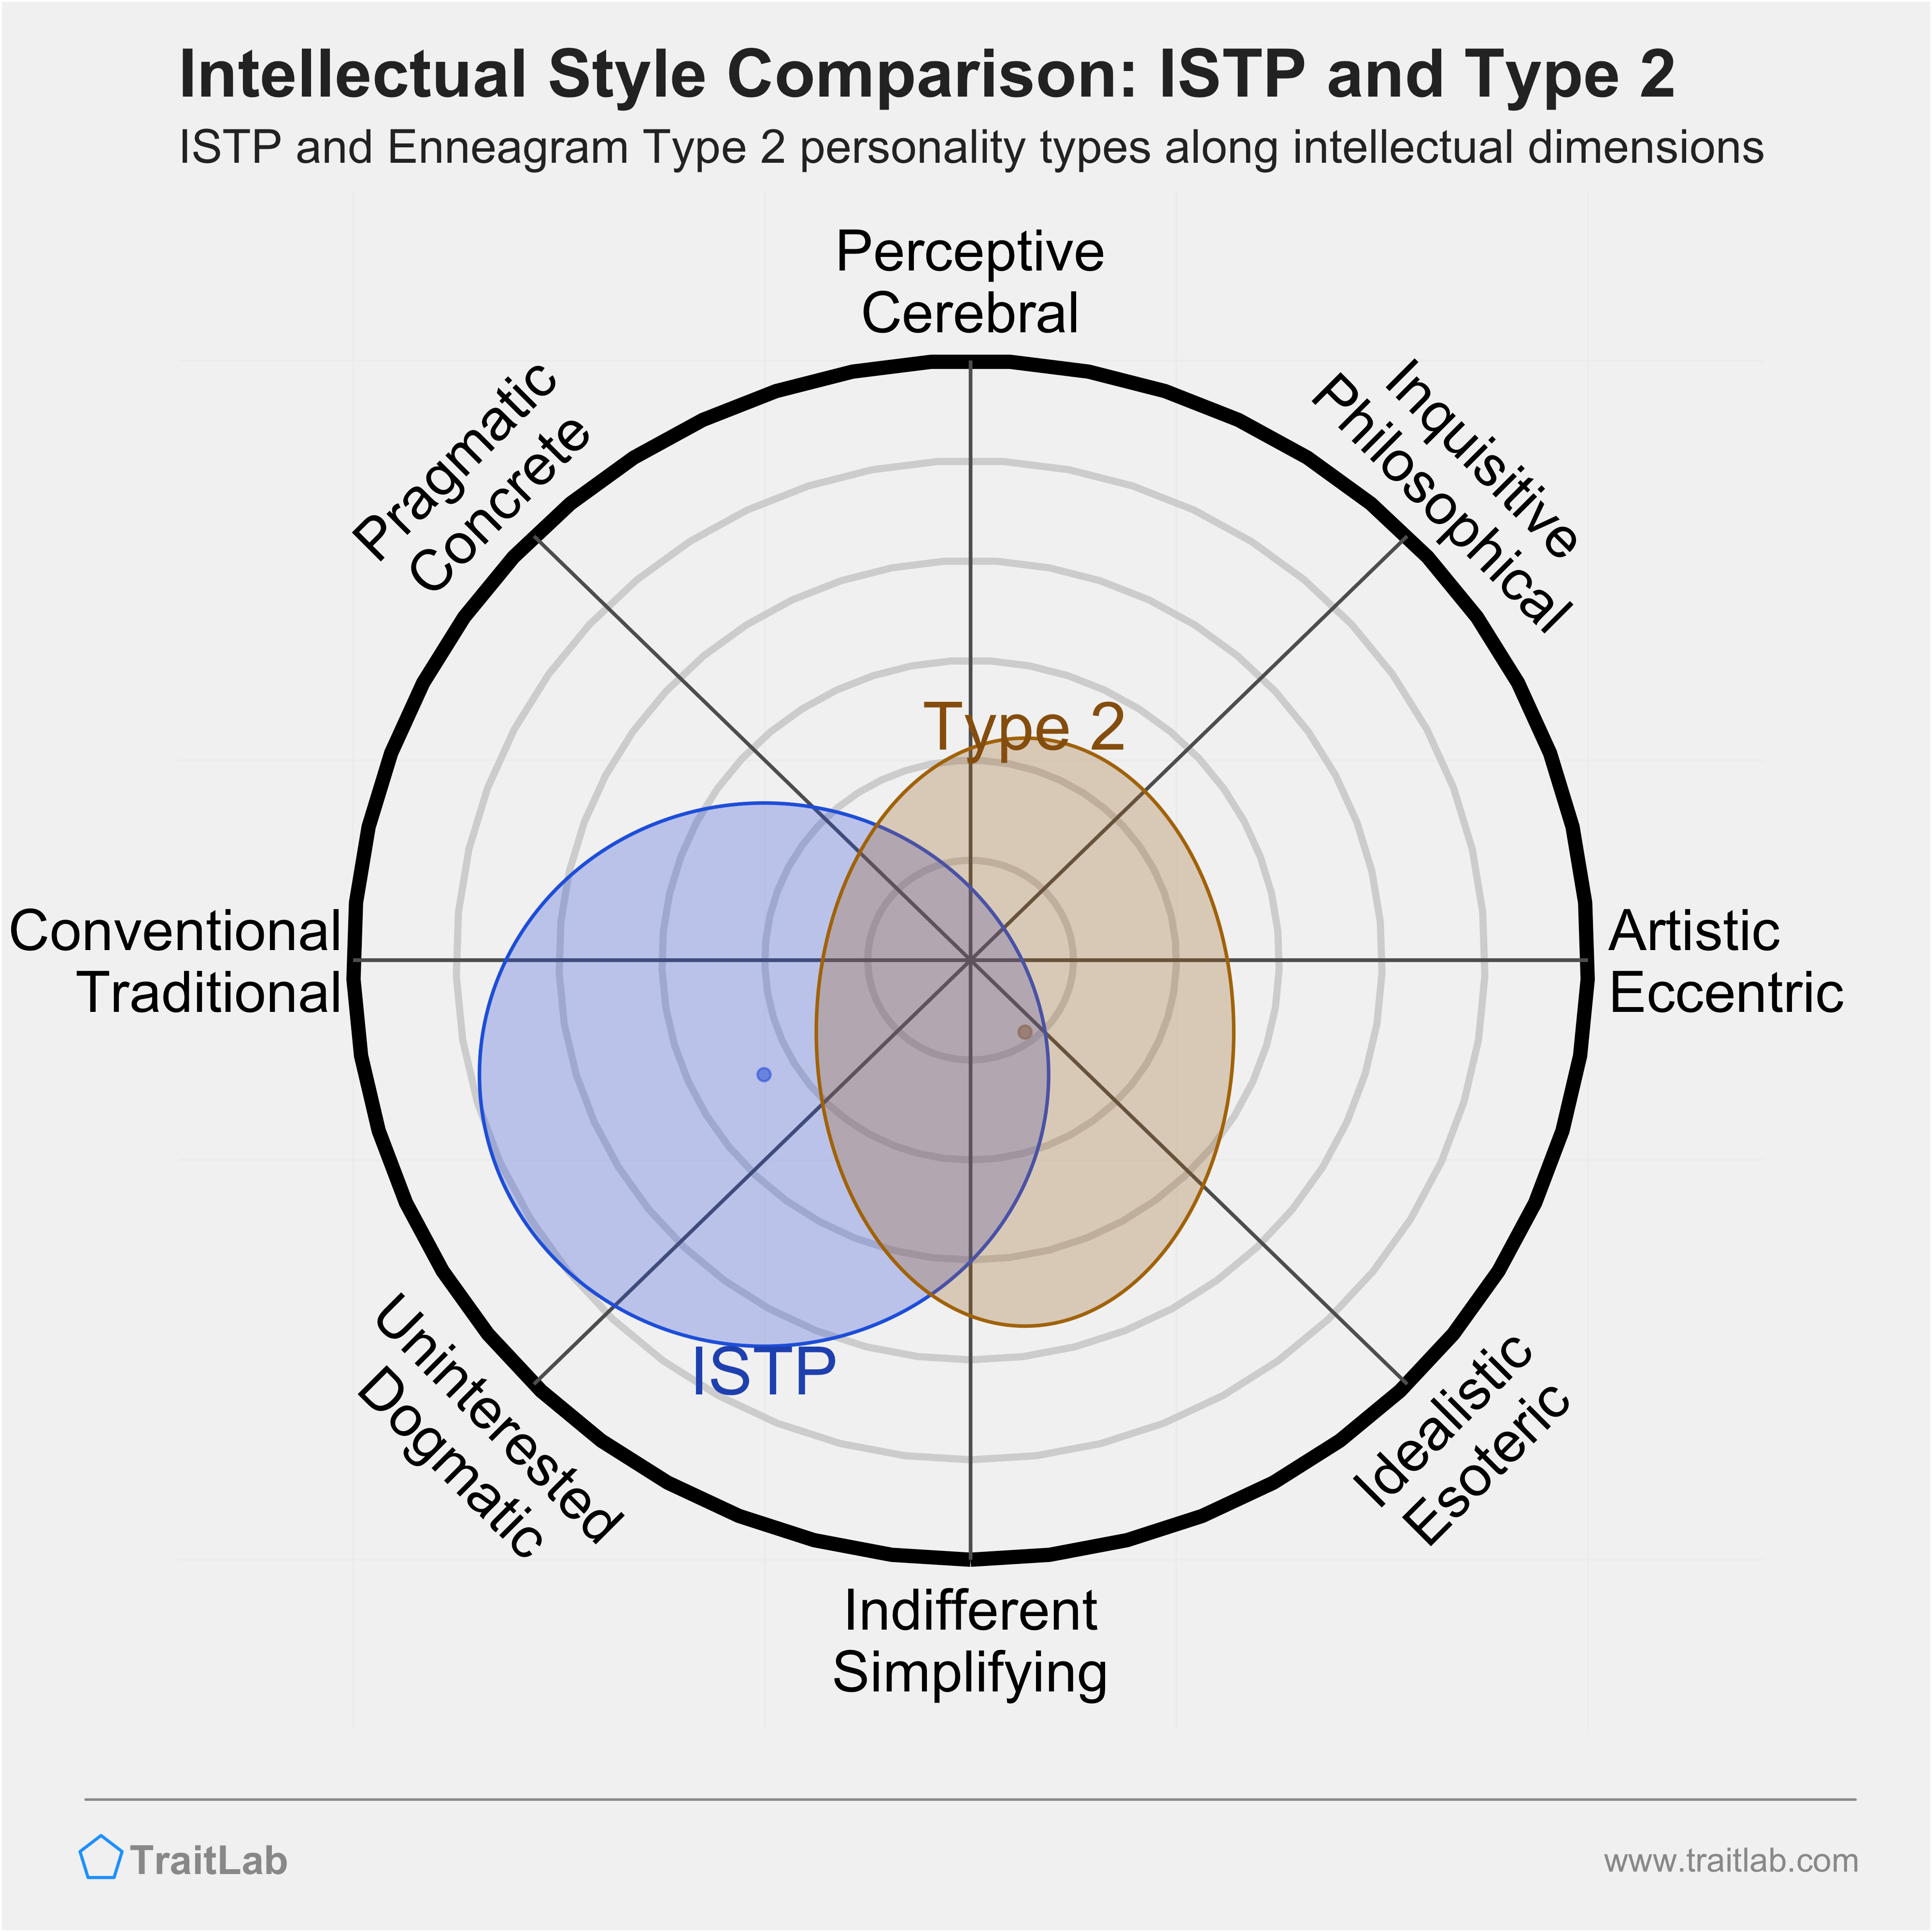 ISTP and Type 2 comparison across intellectual dimensions